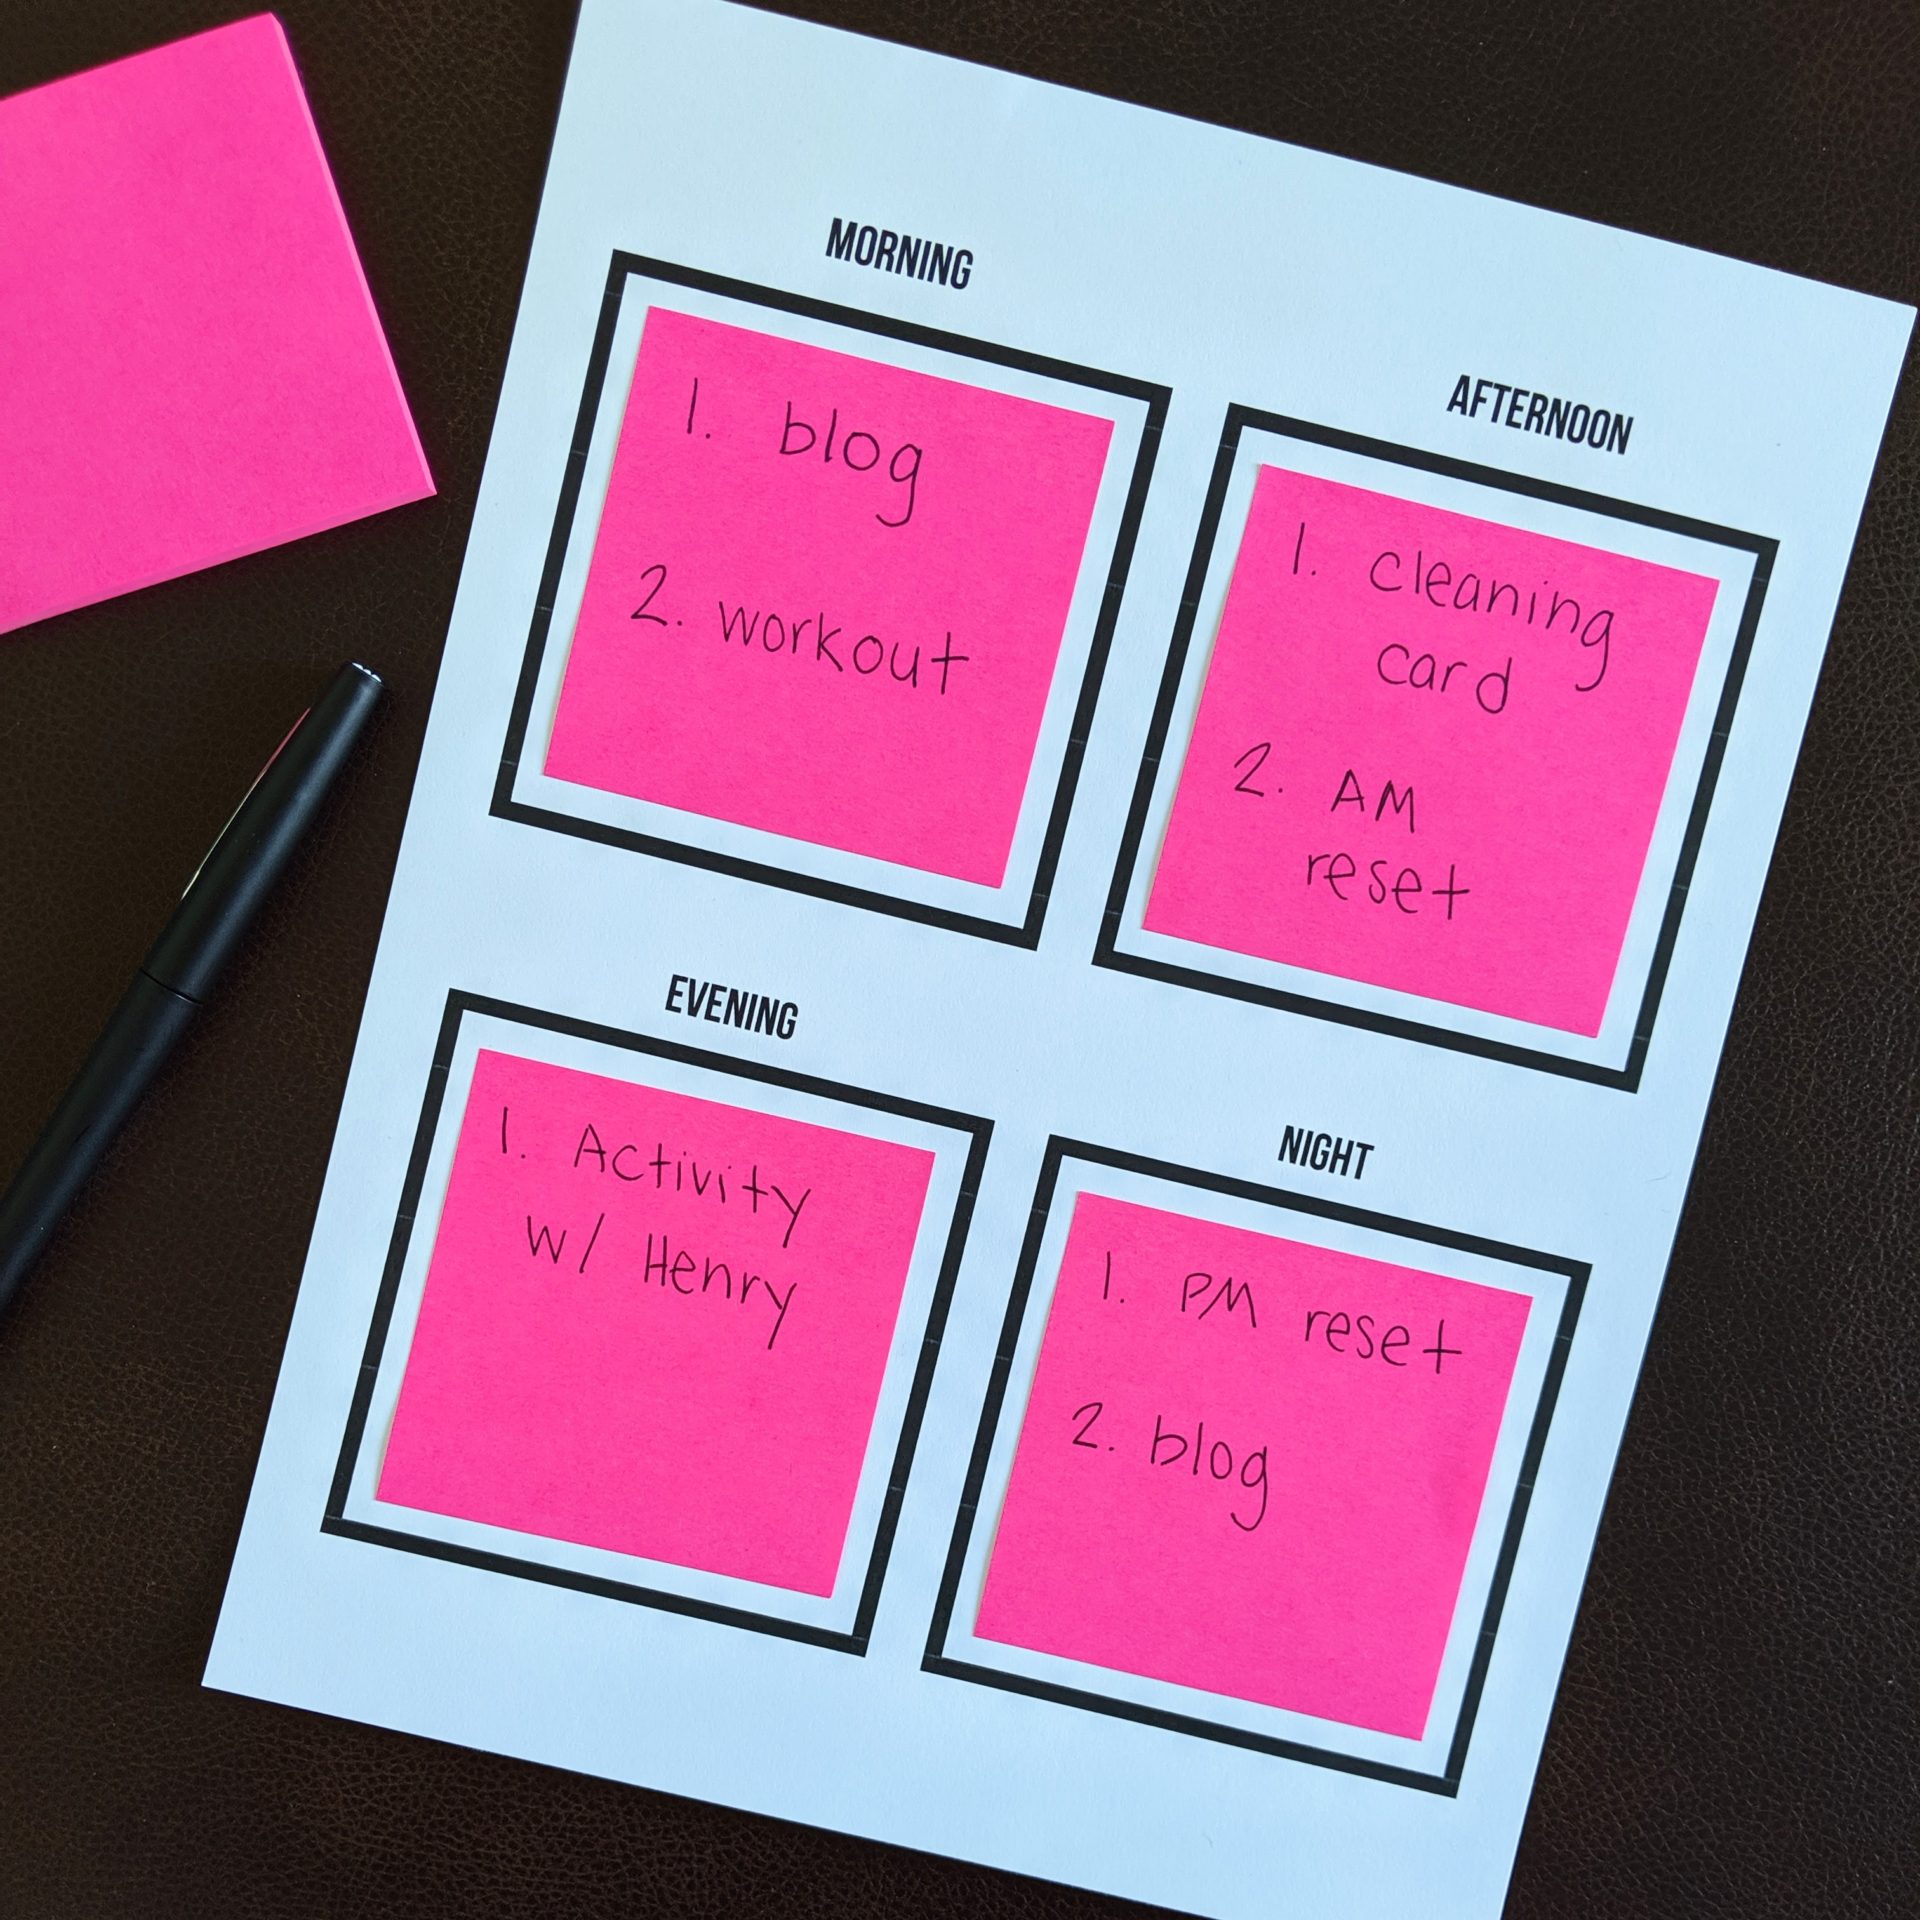 Printable Sticky Notes Template